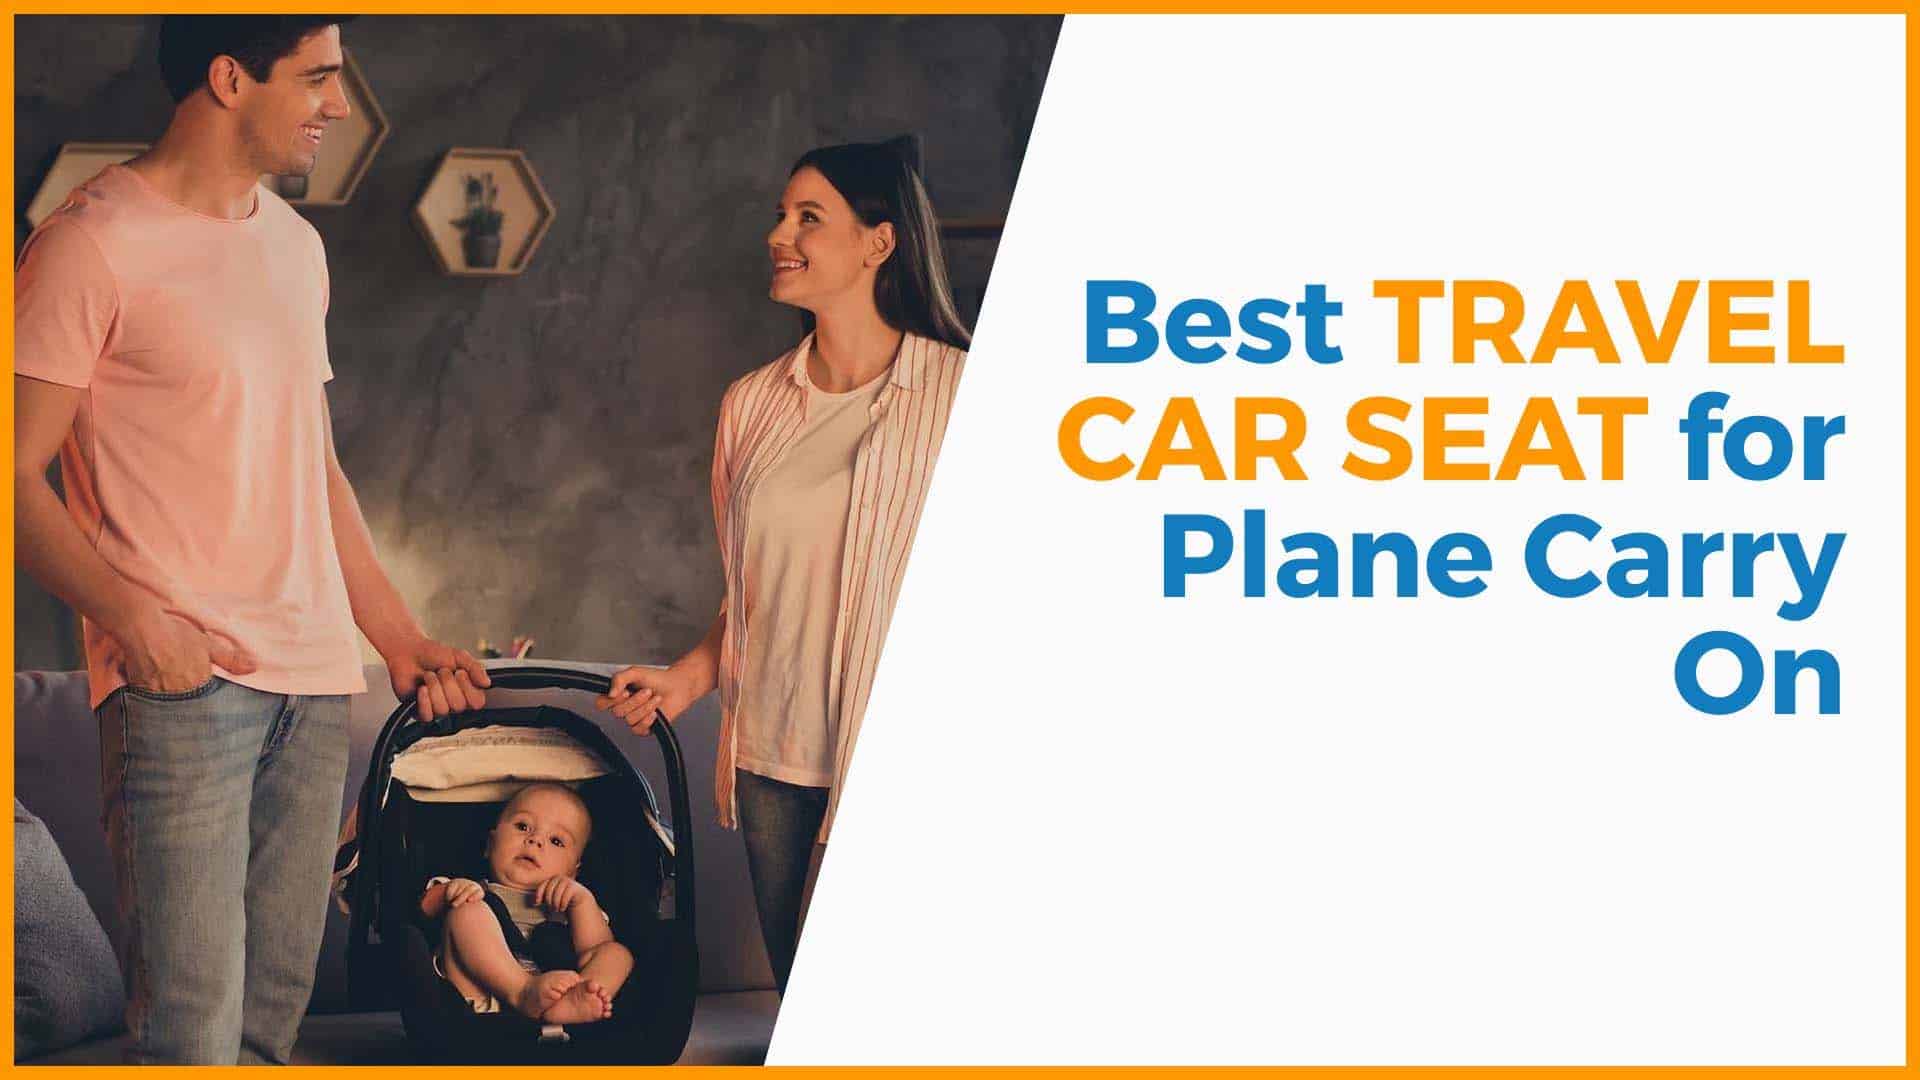 Best Travel Car Seat for Plane Carry On